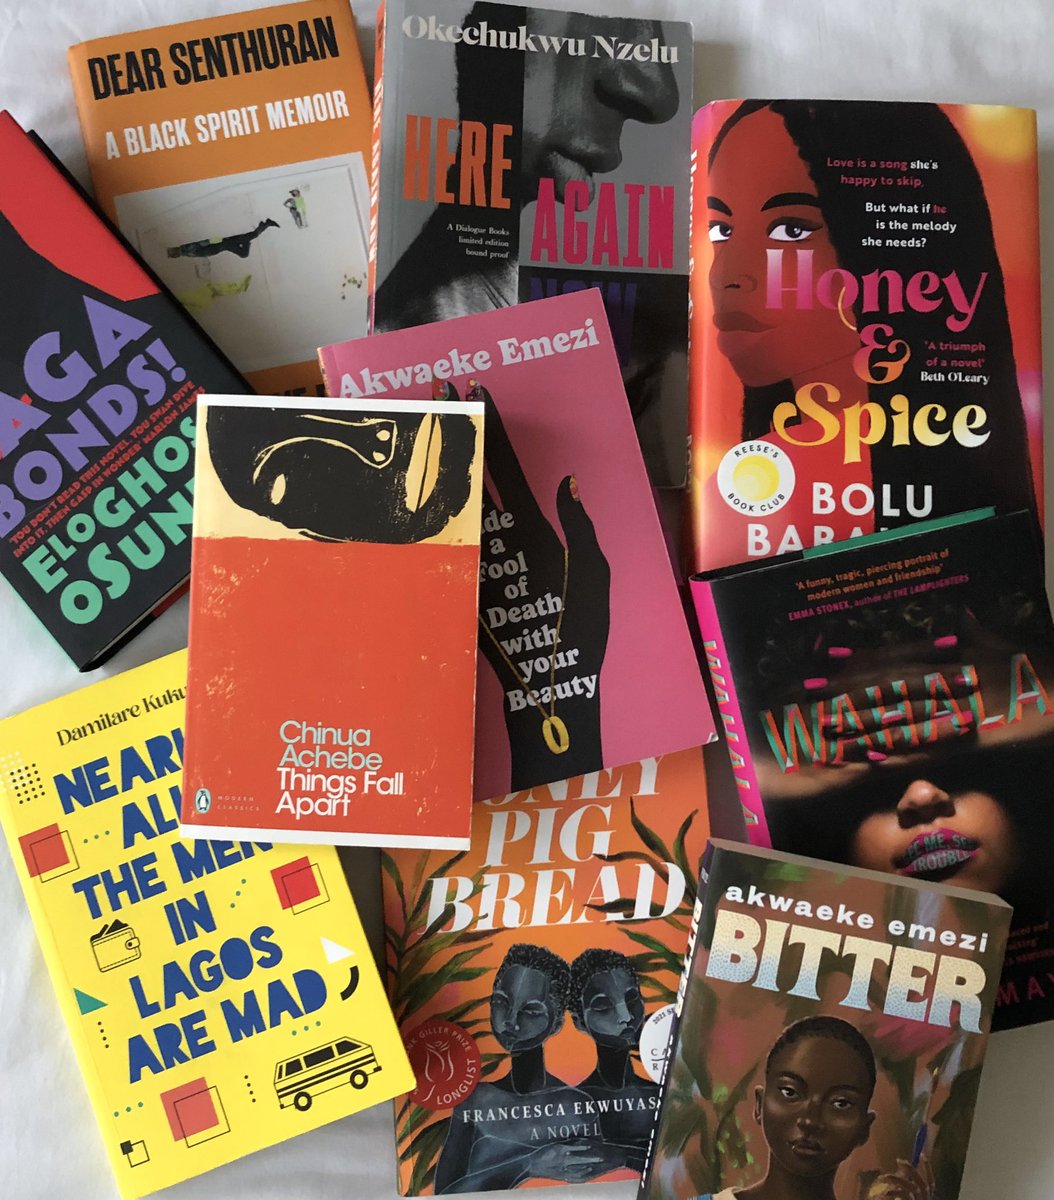 To Women on a Wednesday.

Your favorite African Literature book written by a woman? Let's have it!
.
.
.
#WomenAuthors #WomenWriters #BookTwitter #AfricanBooks